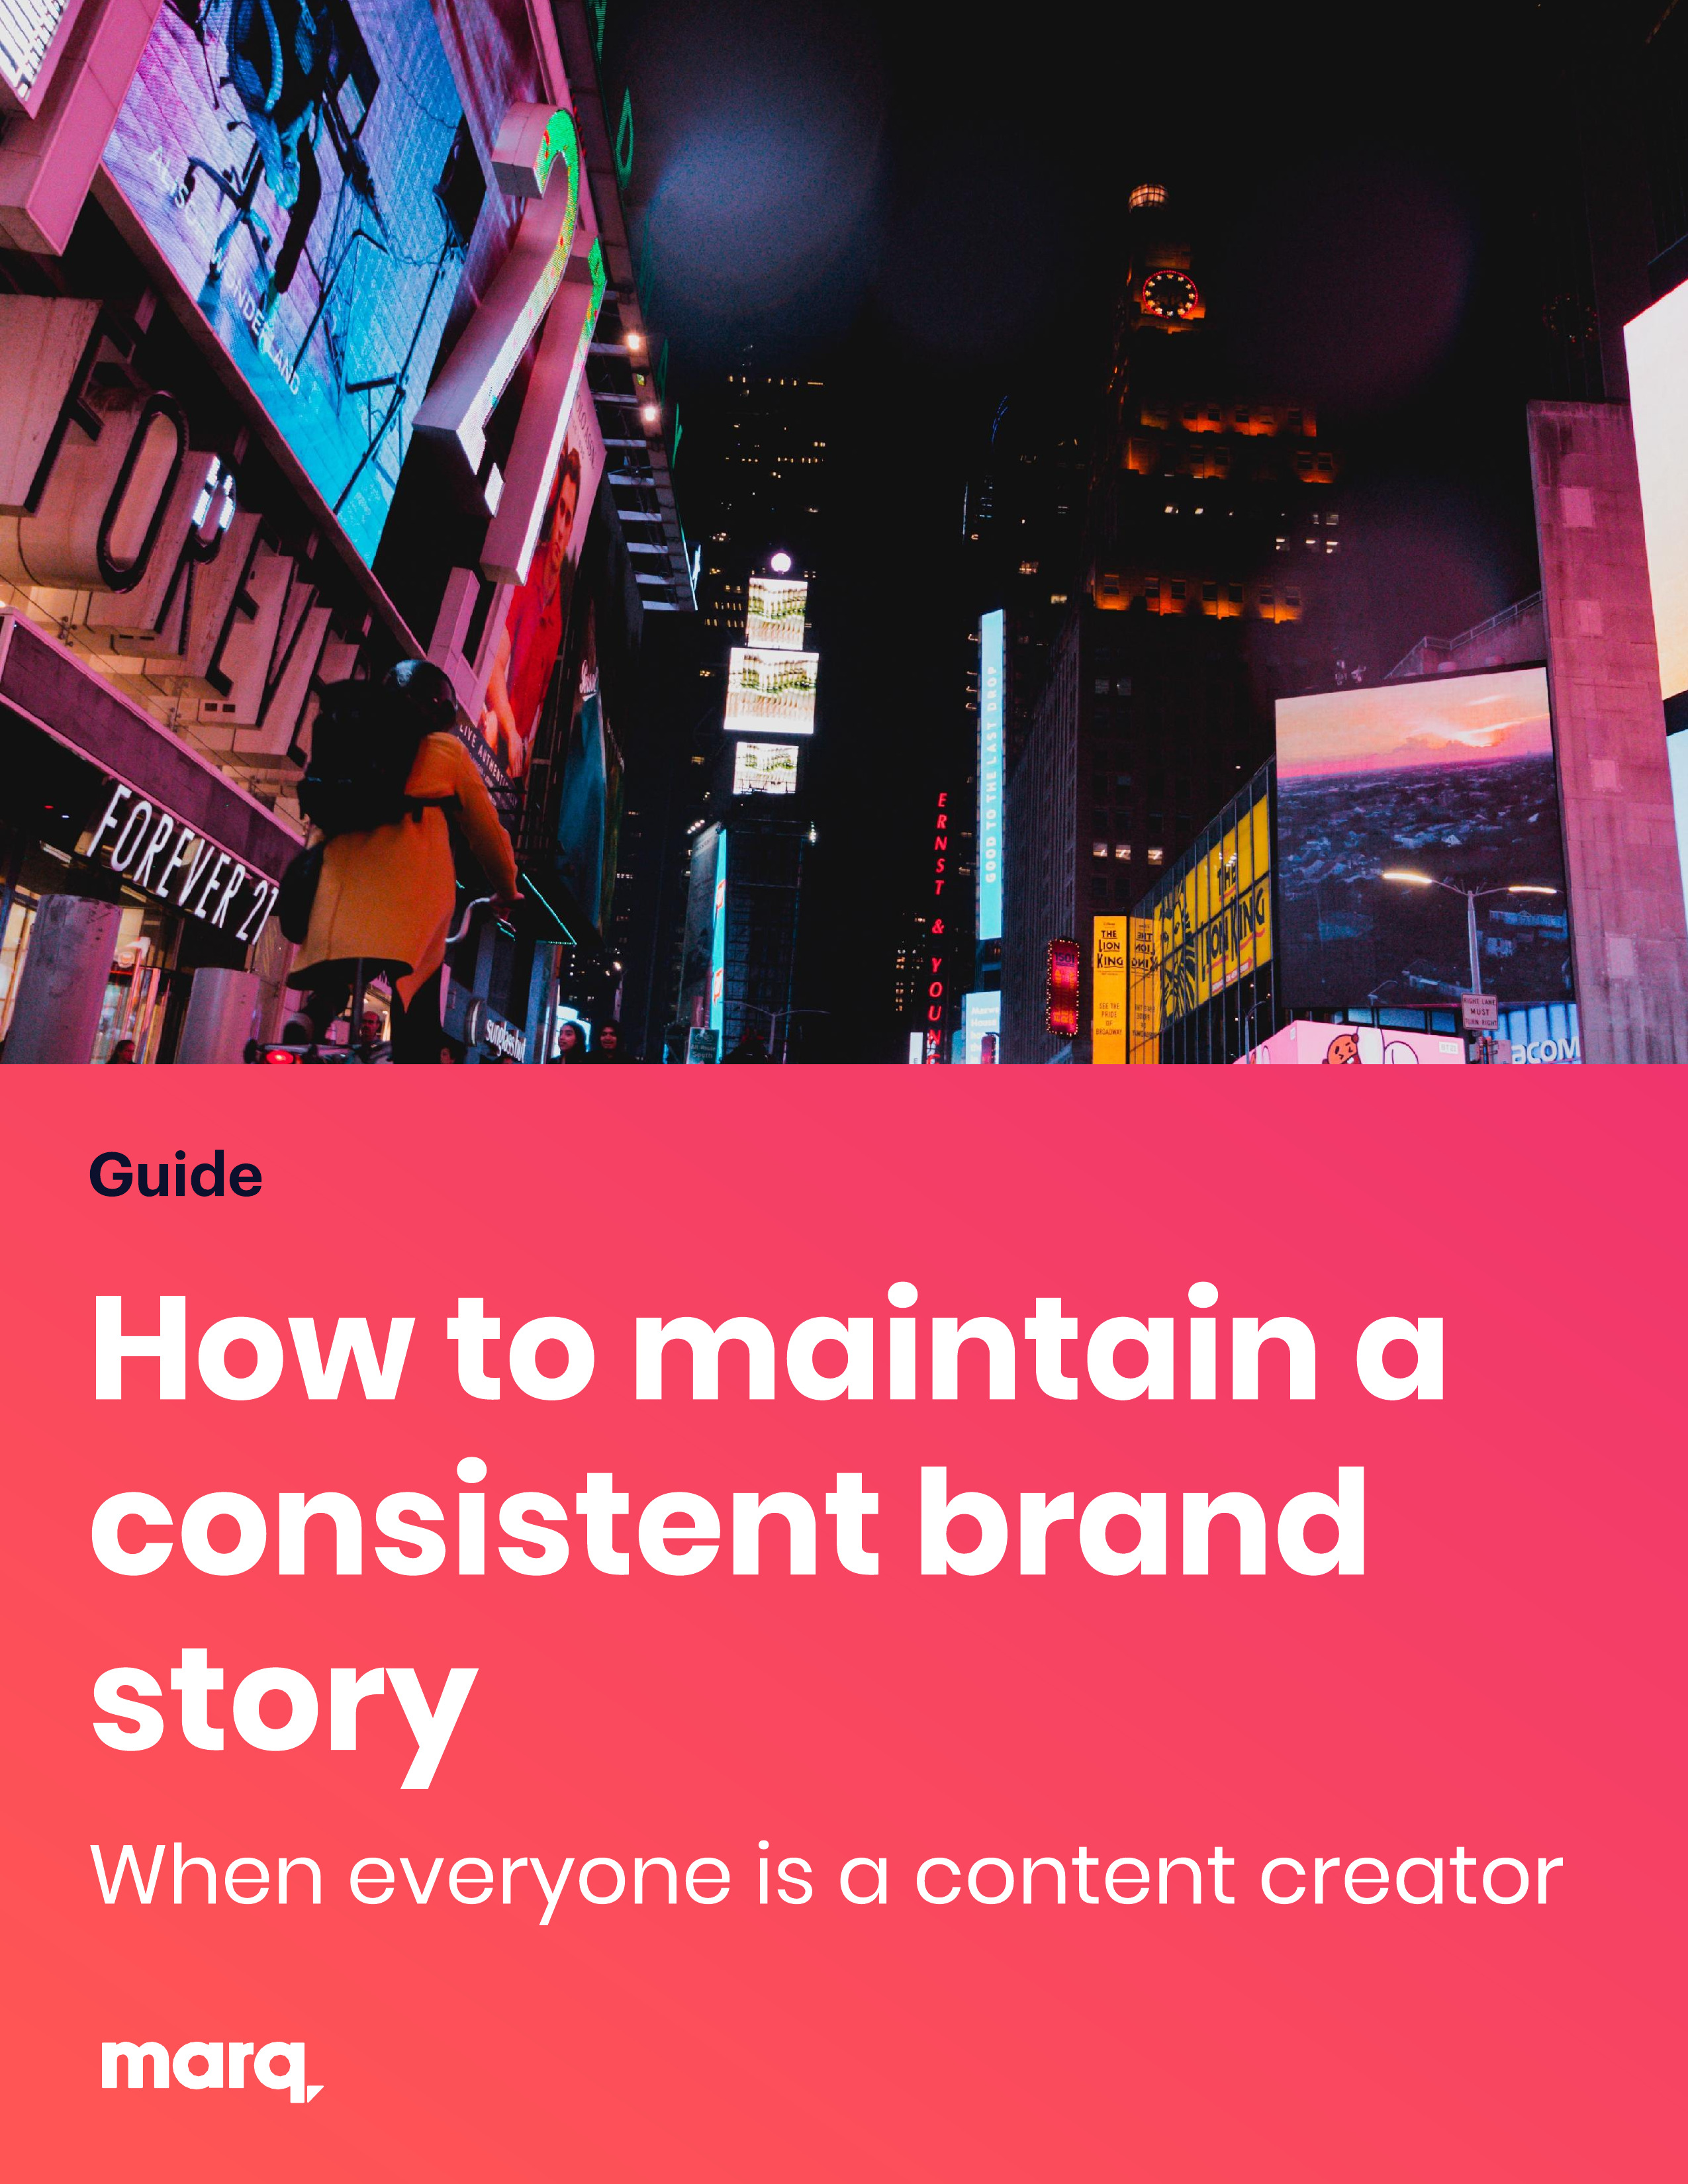 ebook-maintain-a-consistent-brand-story-everyone-content-creator